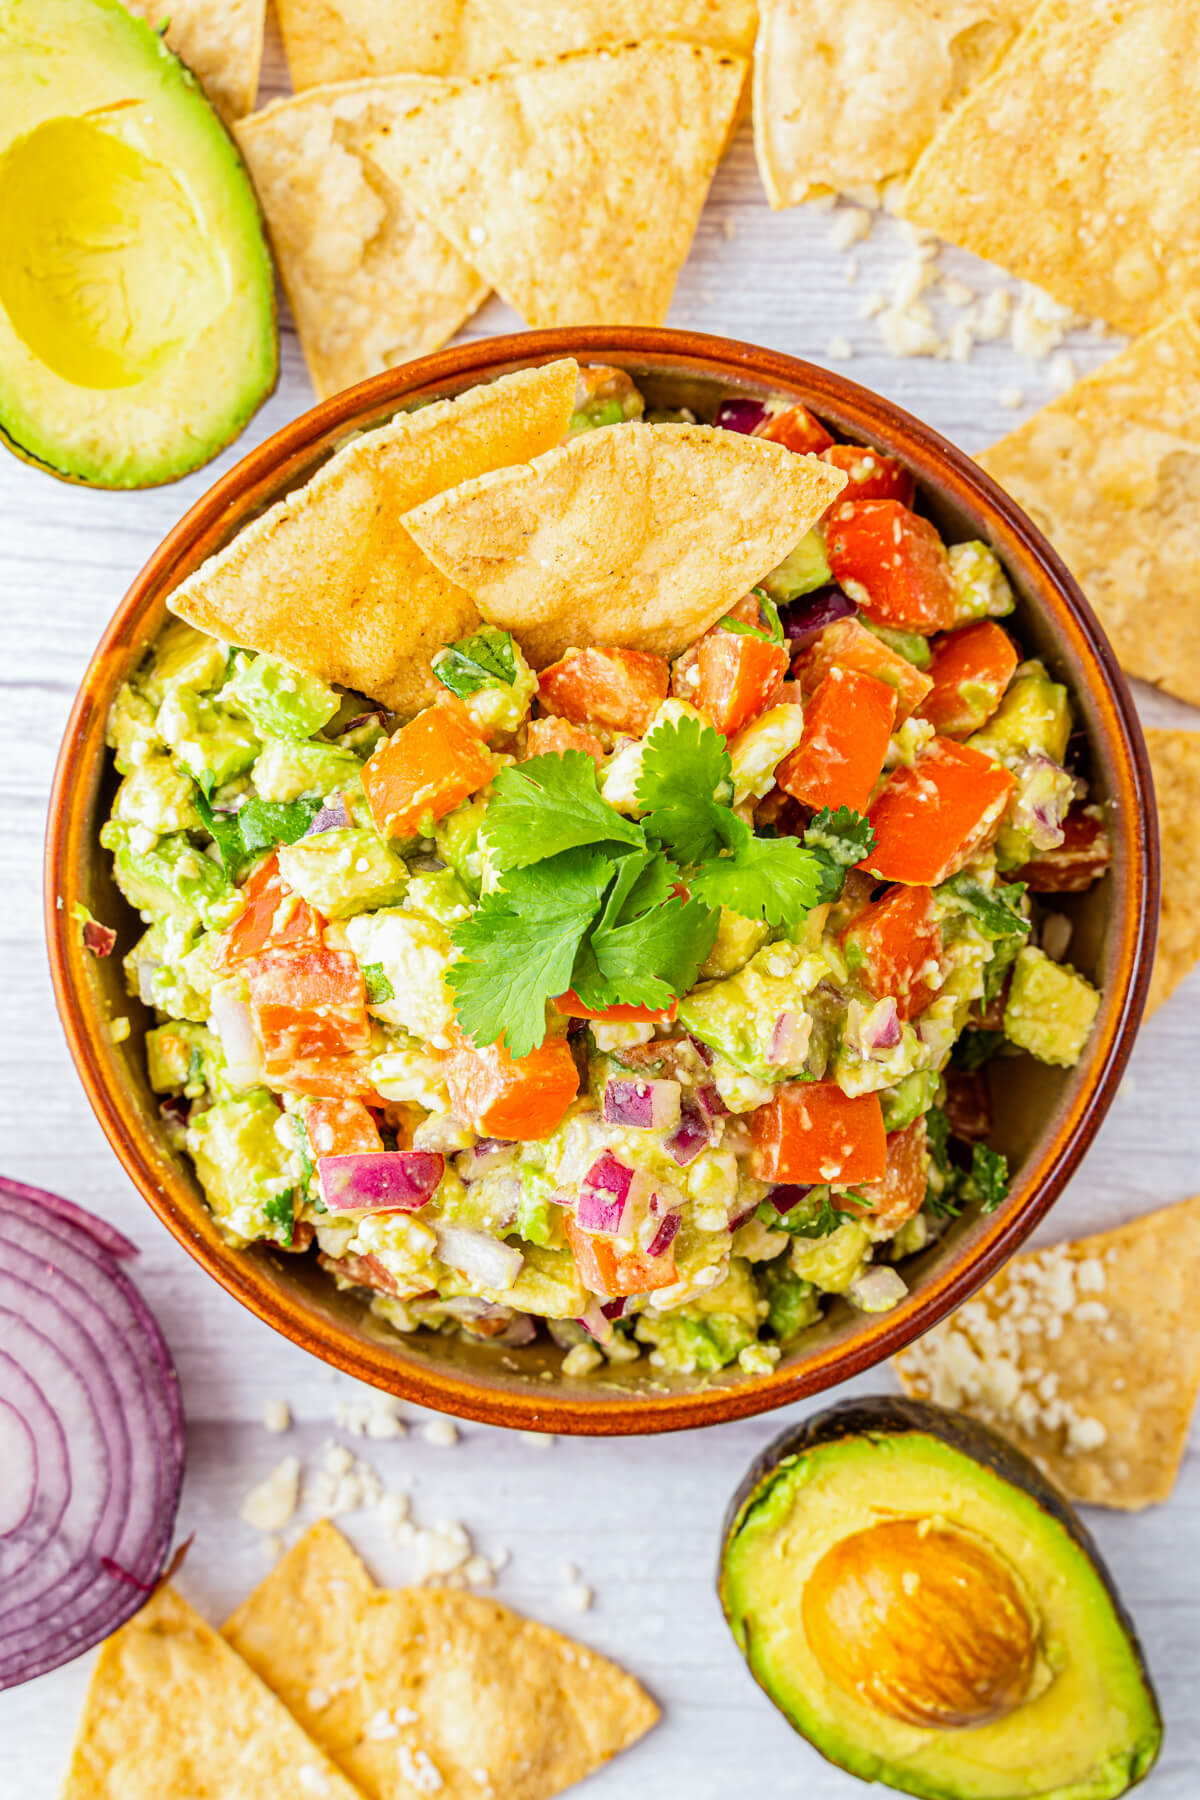 A terra cotta bowl full of chunky avocado salsa featuring avocado, tomatoes, cilantro, Cotija cheese, and red onions garnished with tortilla chips.